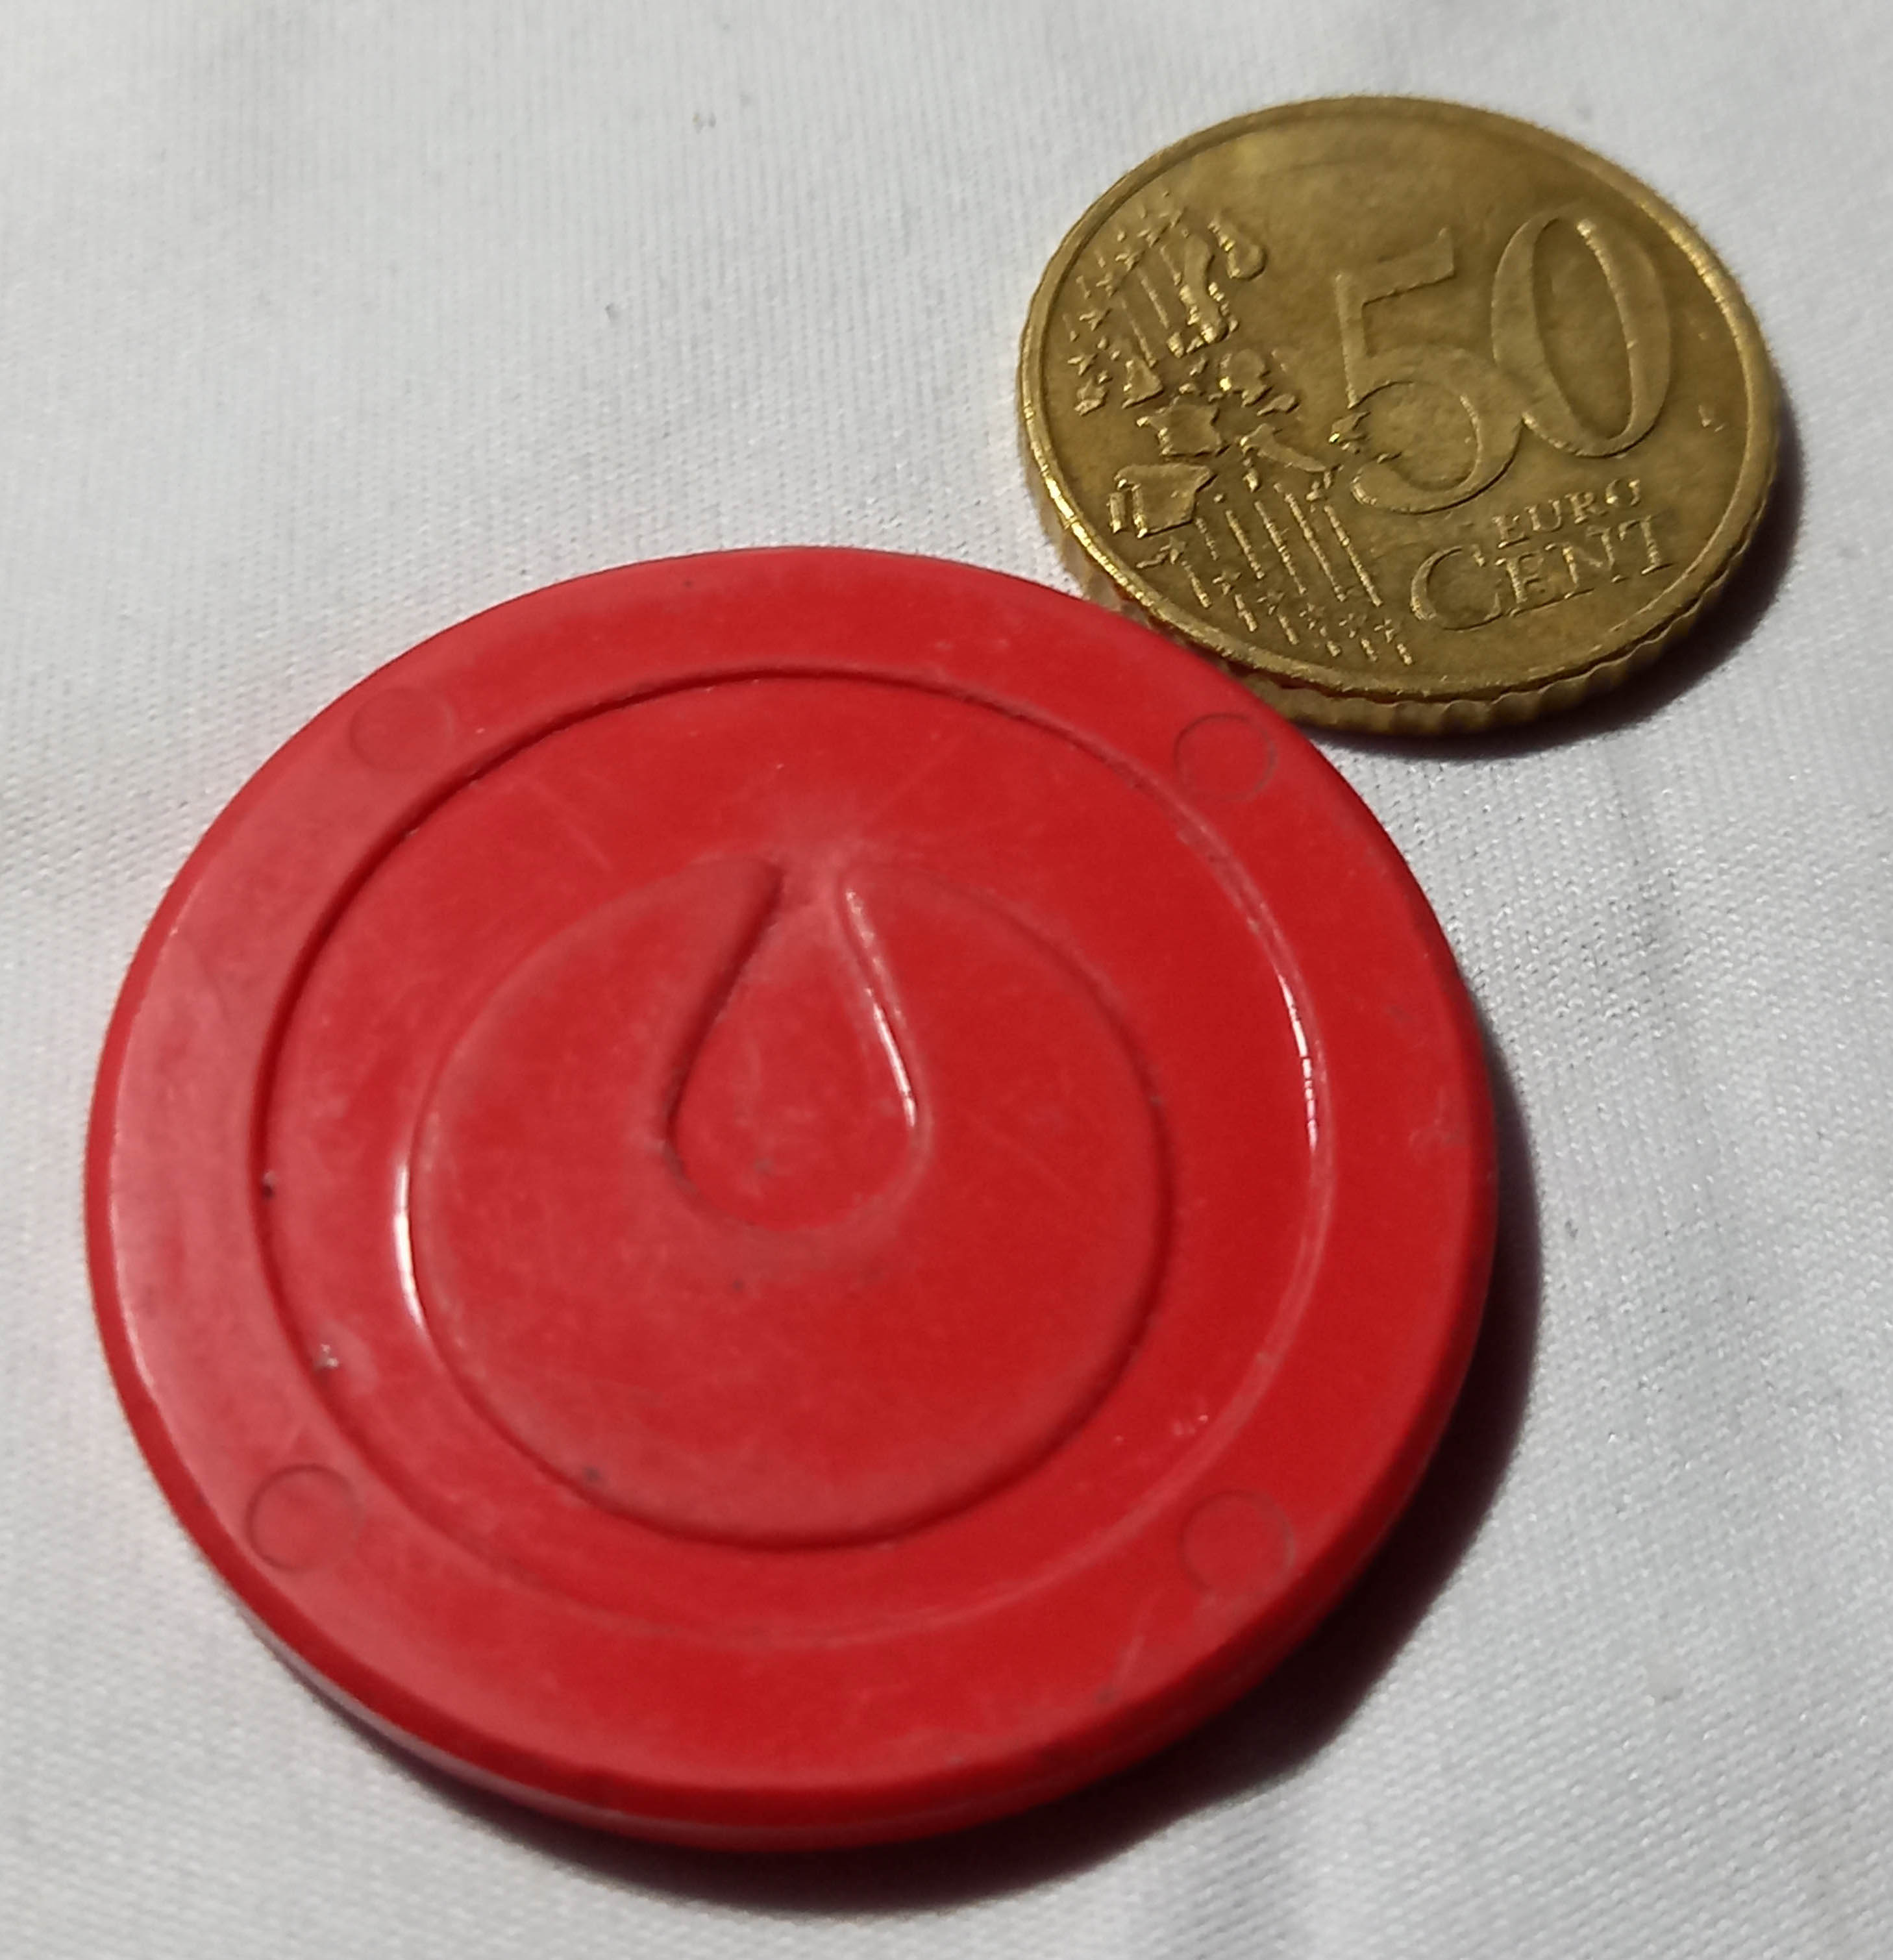 You can see a bioplastic badge lying next to a 50 cent coin, about twice the size of it.